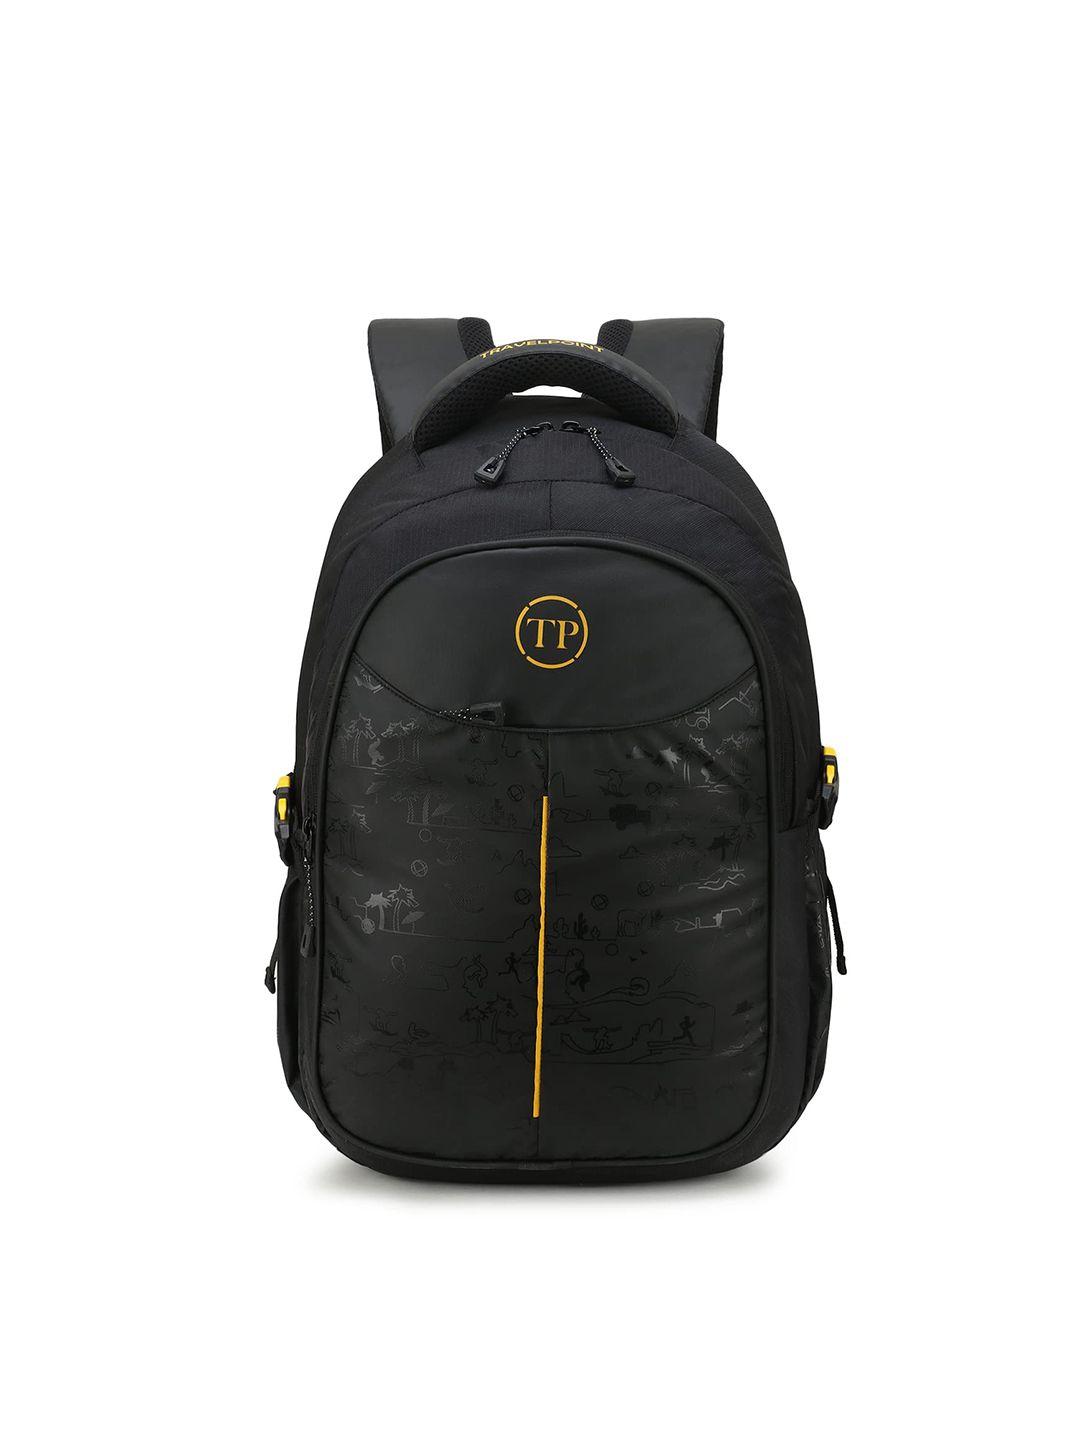 travel point brand logo backpack with compression straps